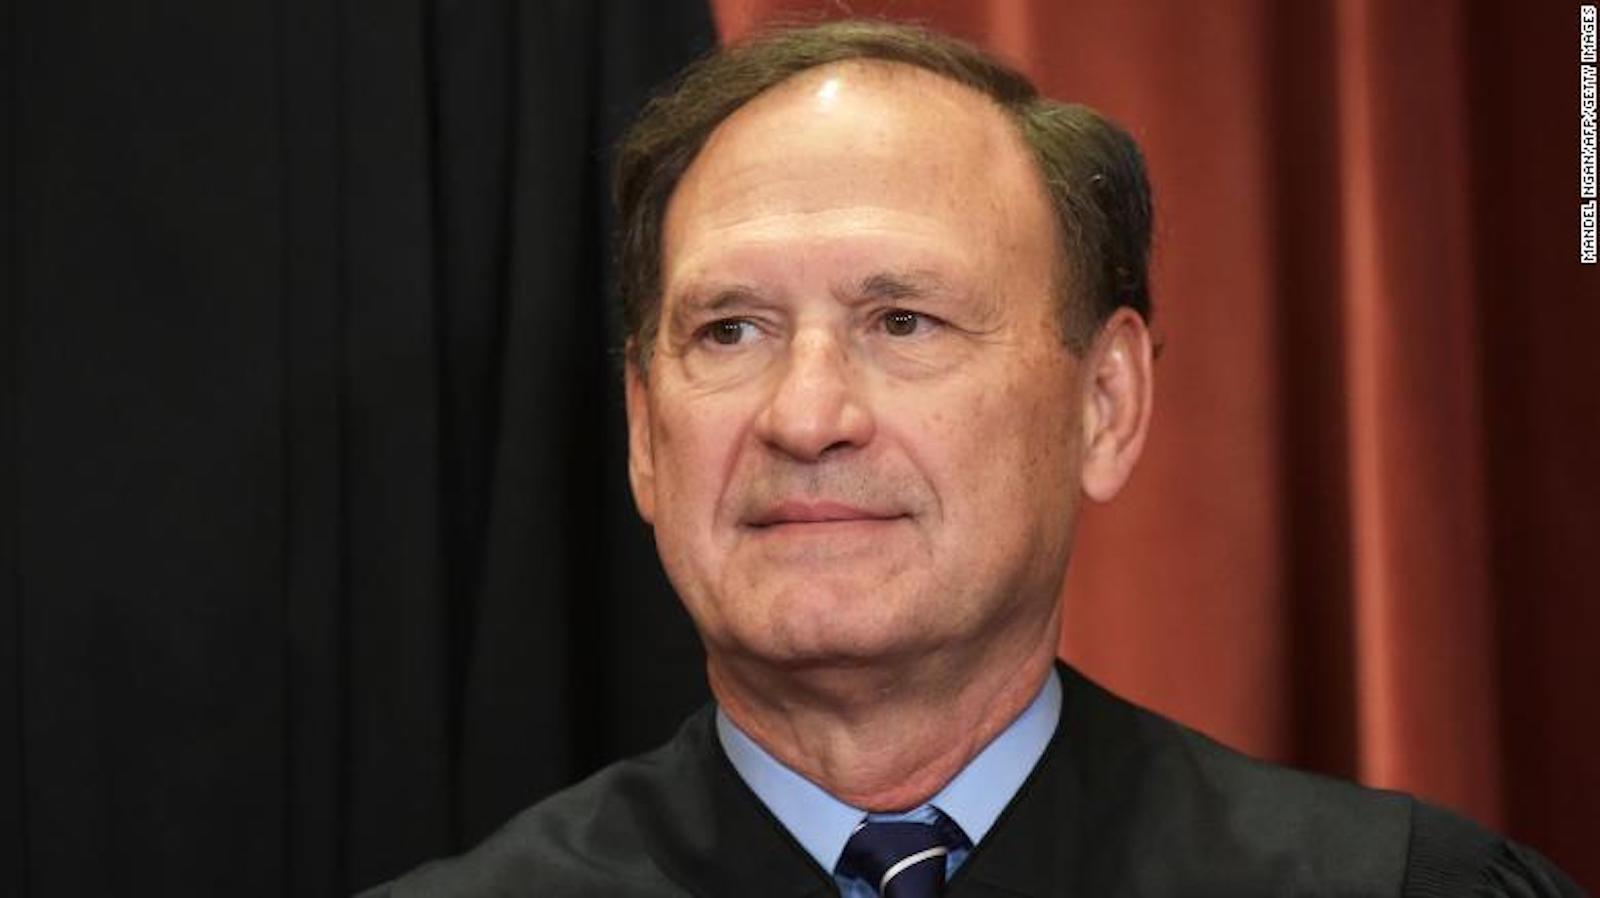 Judge Samuel Alito lashes out at Liberals after weapons ruling as tensions rise in the Supreme Court of Justice